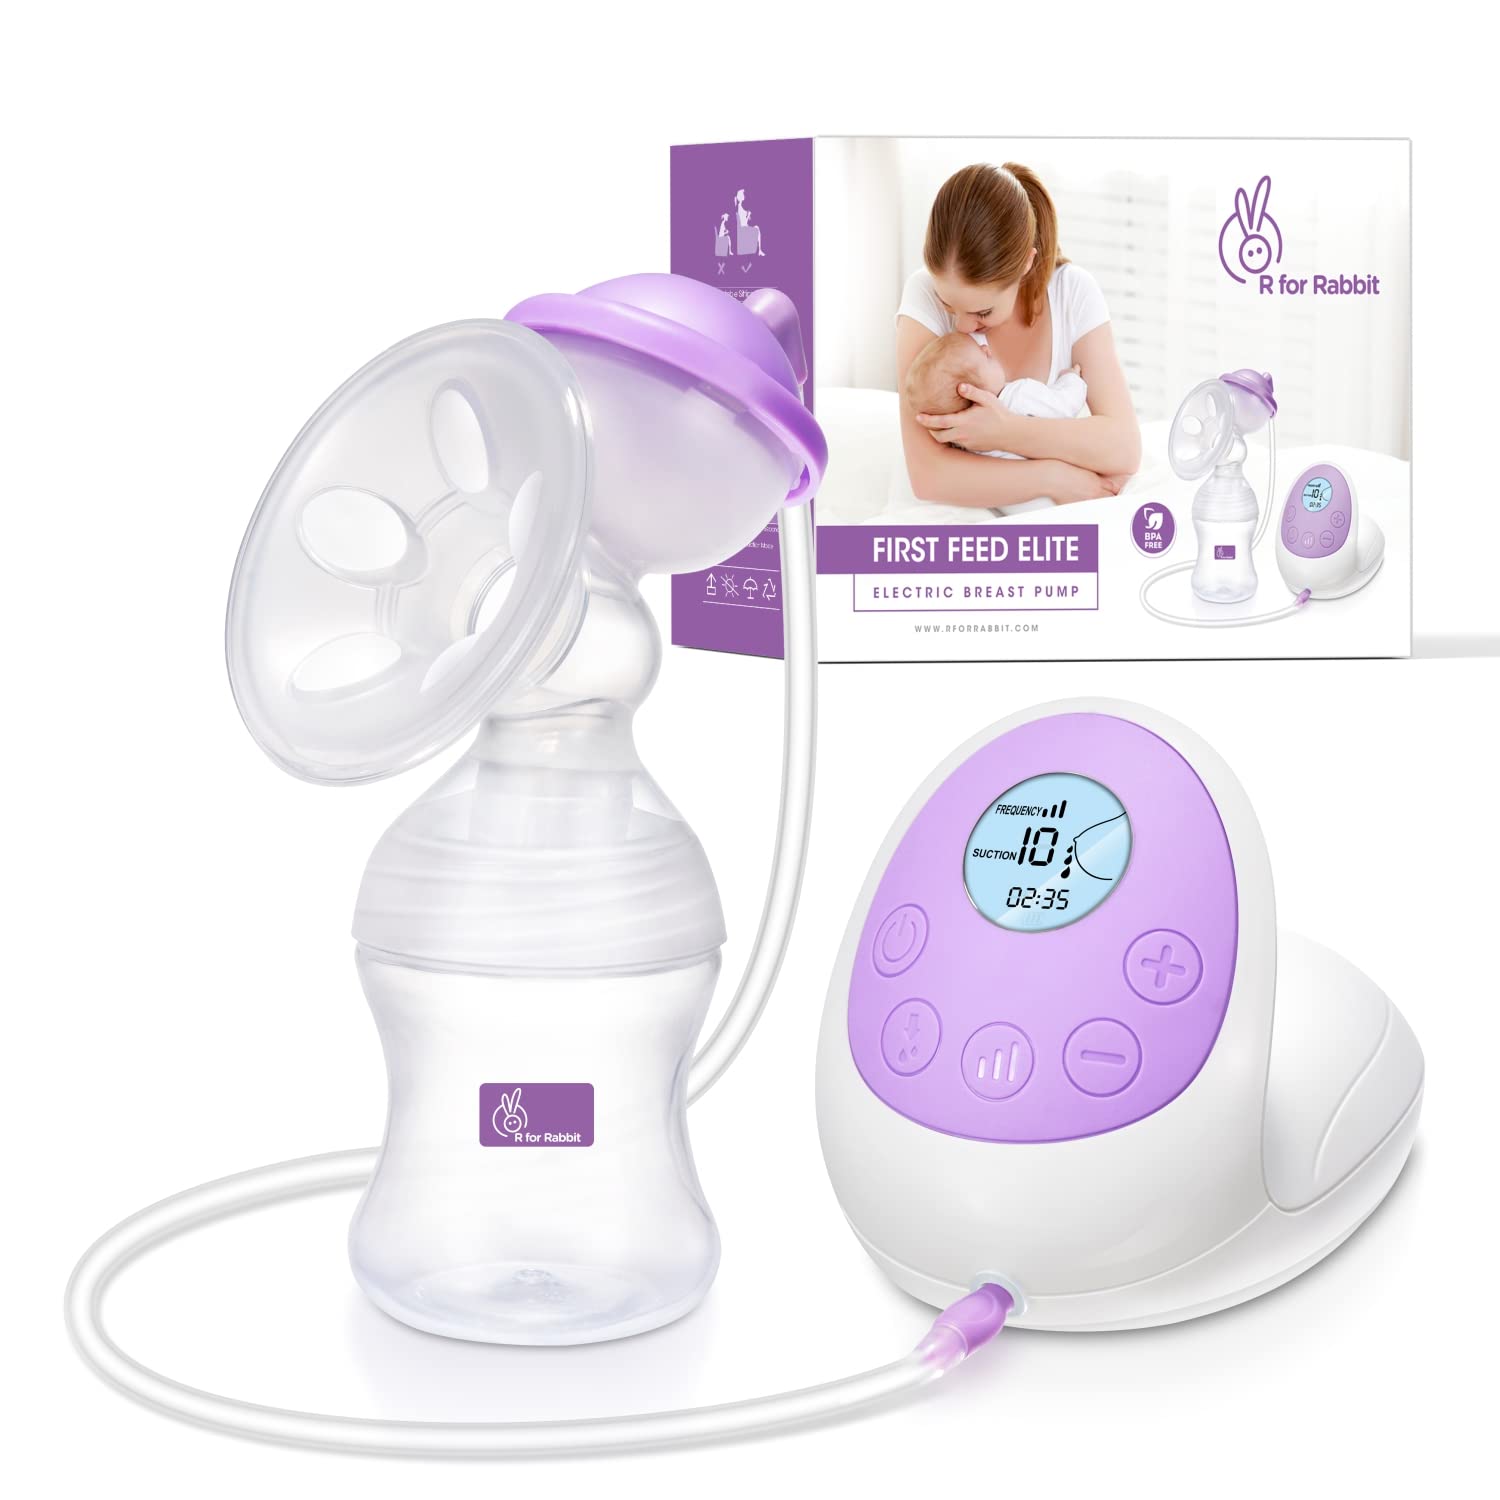 R for Rabbit First Feed Elite Electric Breast Pump